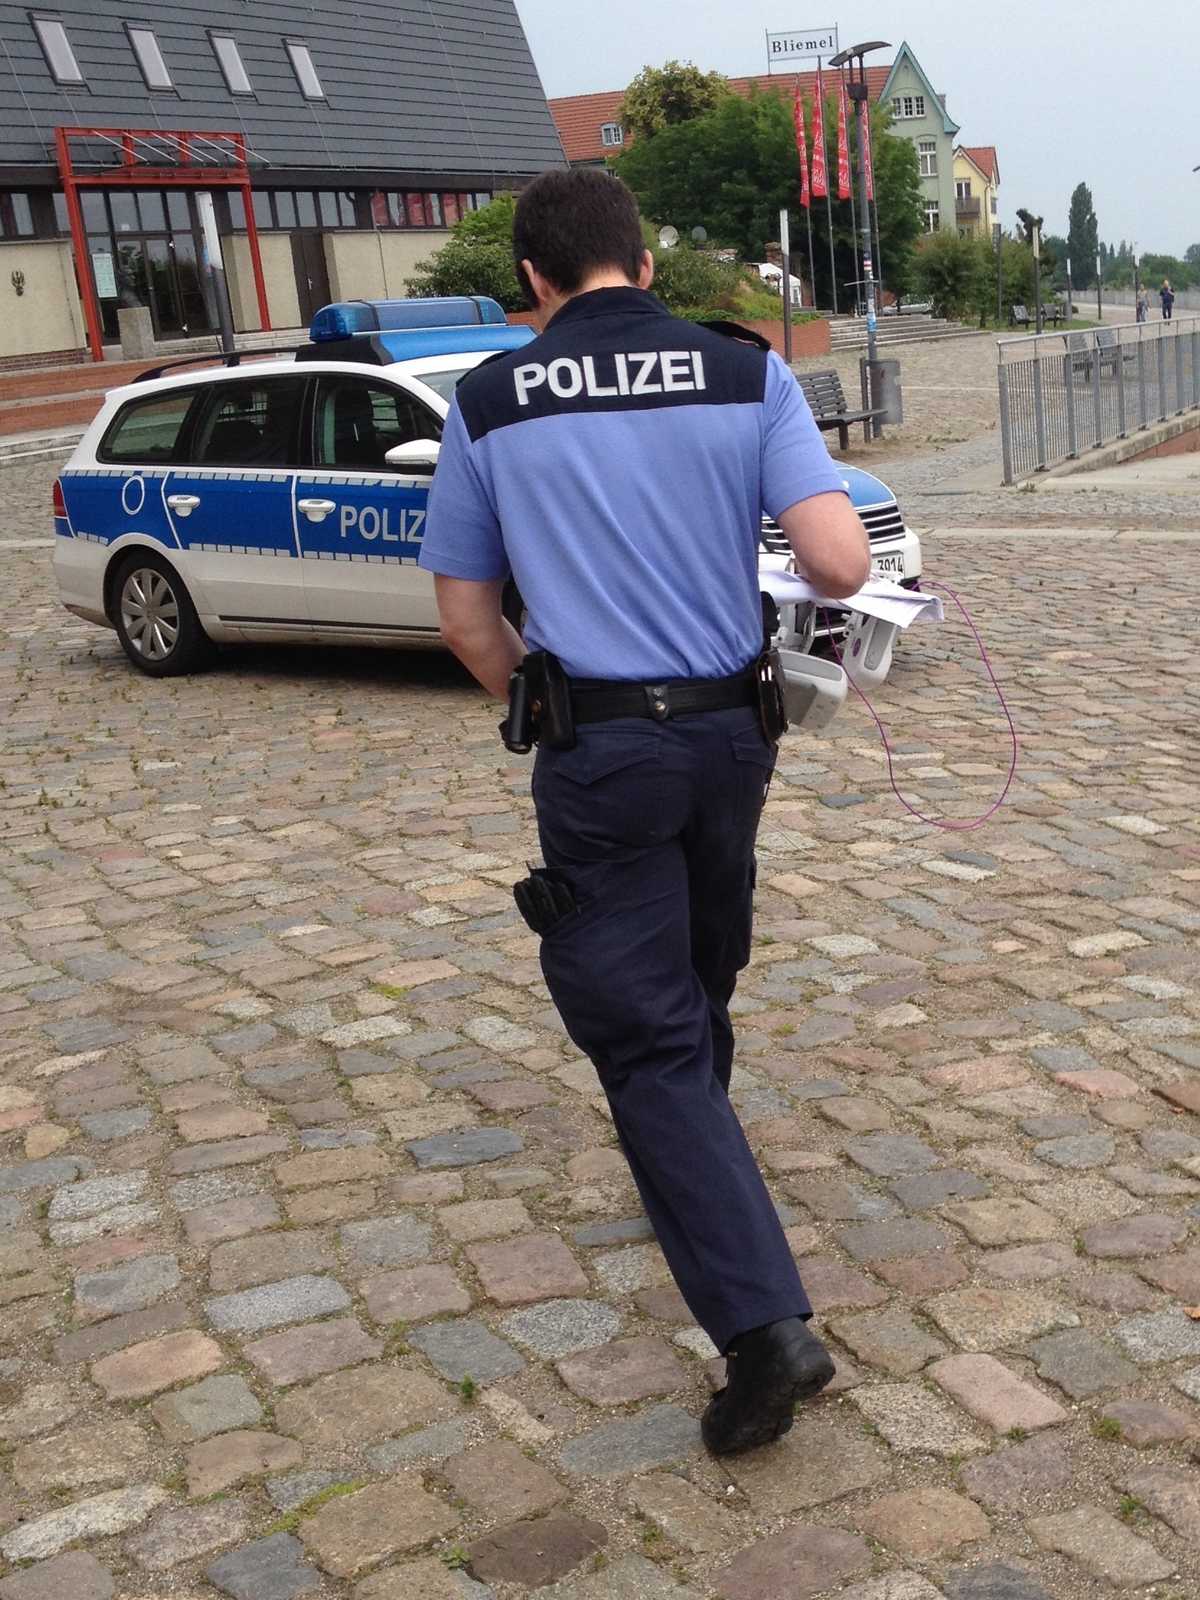 German police officers taking the controller to their car